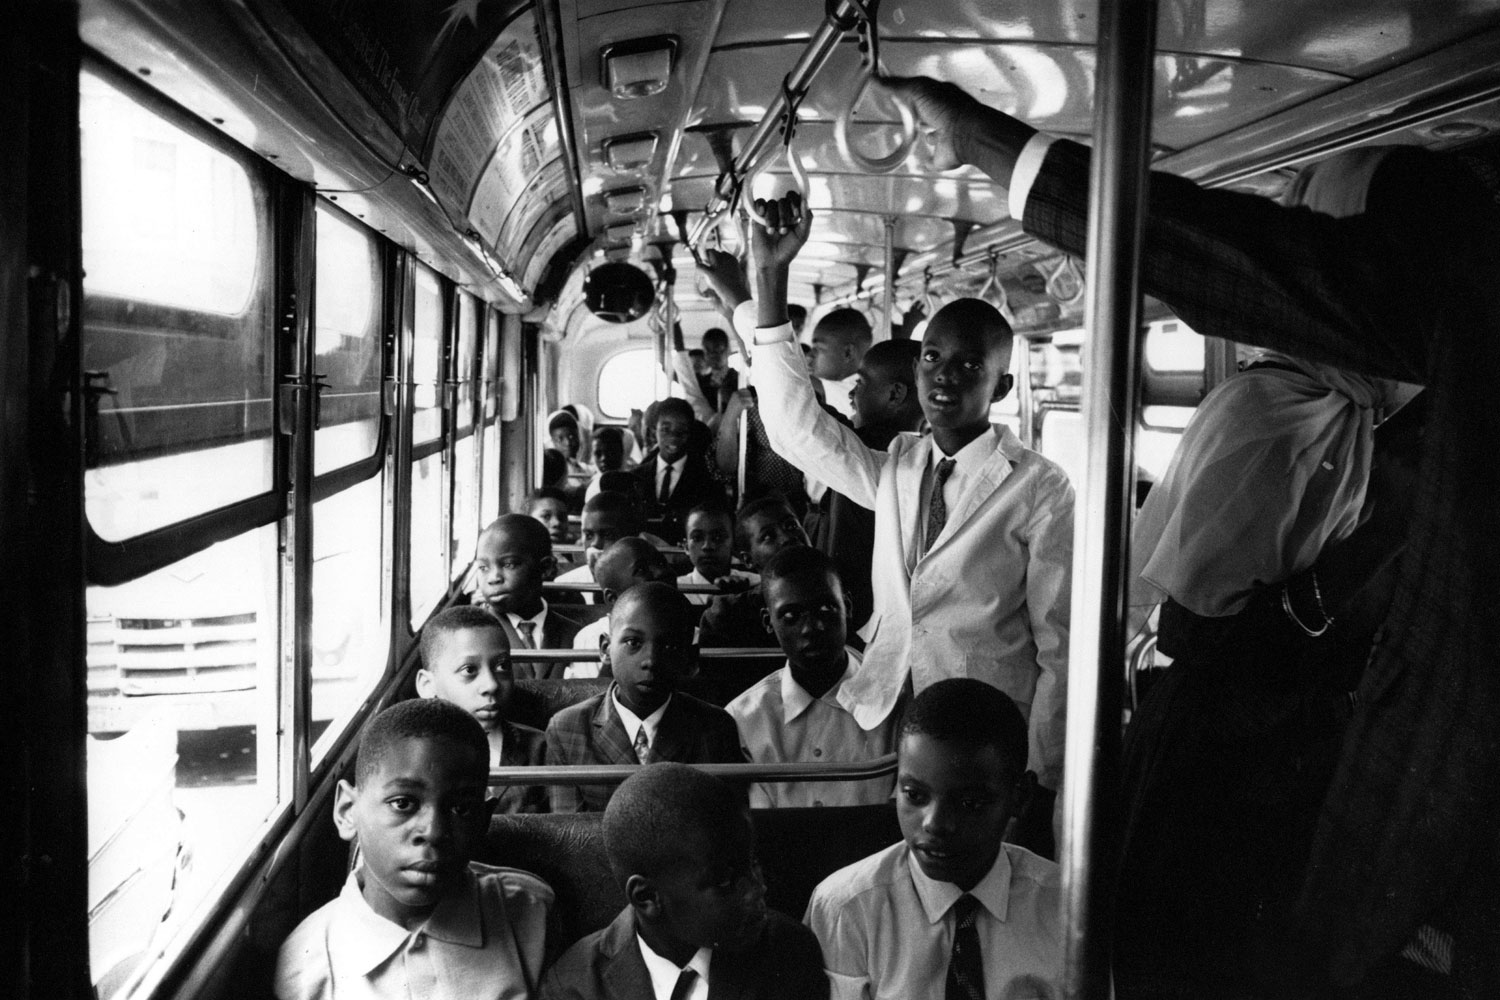 Children of members of the Nation of Islam on their way to the Metropolitan Museum of Art, New York City, 1961.